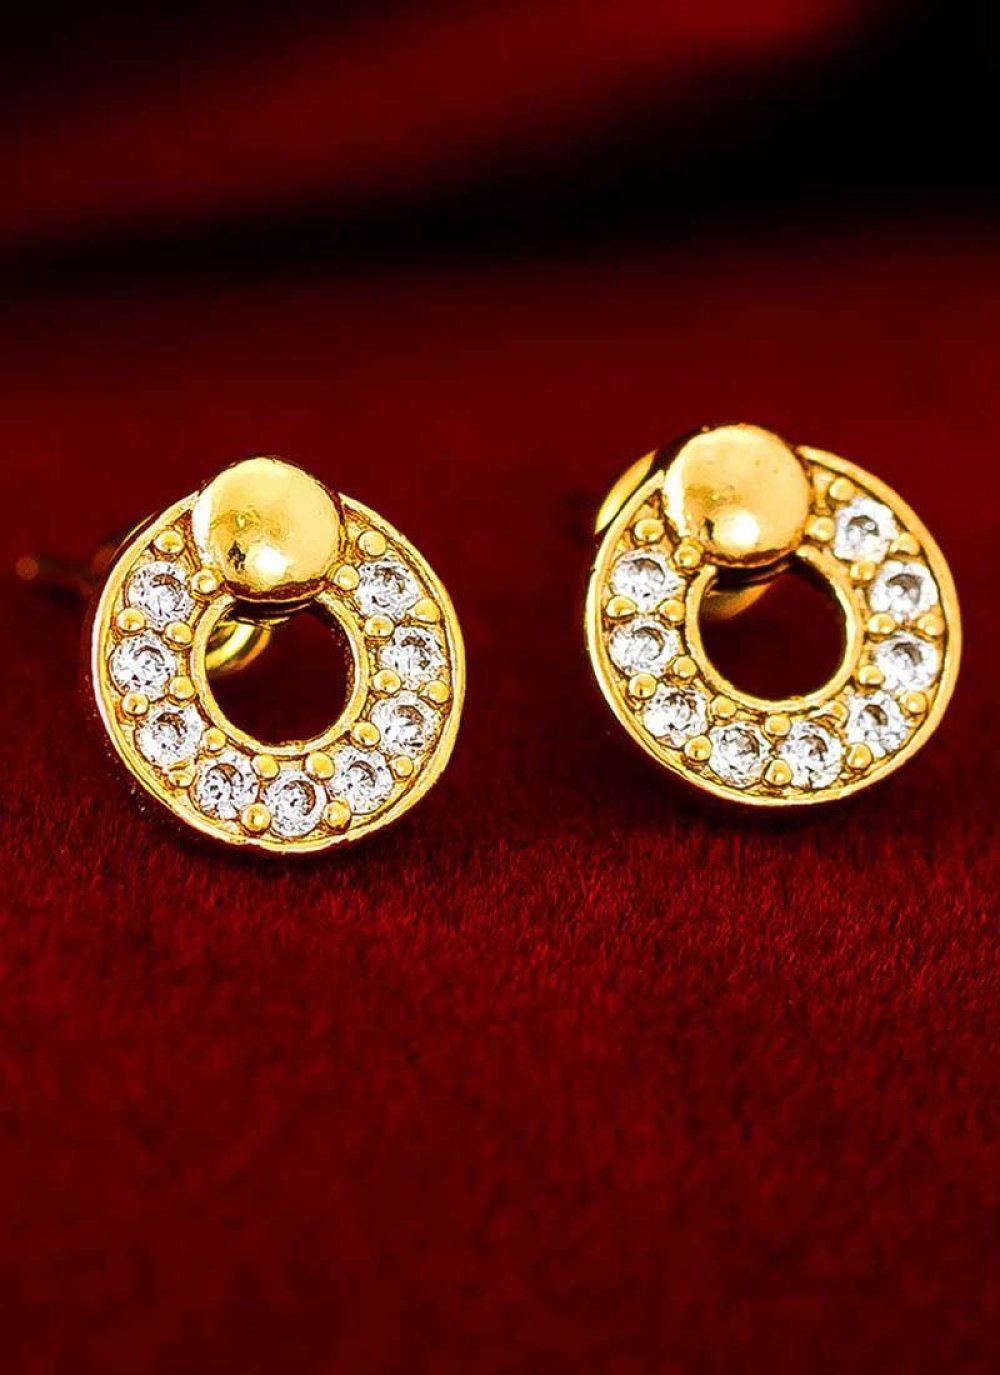 Flamboyant Alloy Gold Rodium Polish Earrings For Party